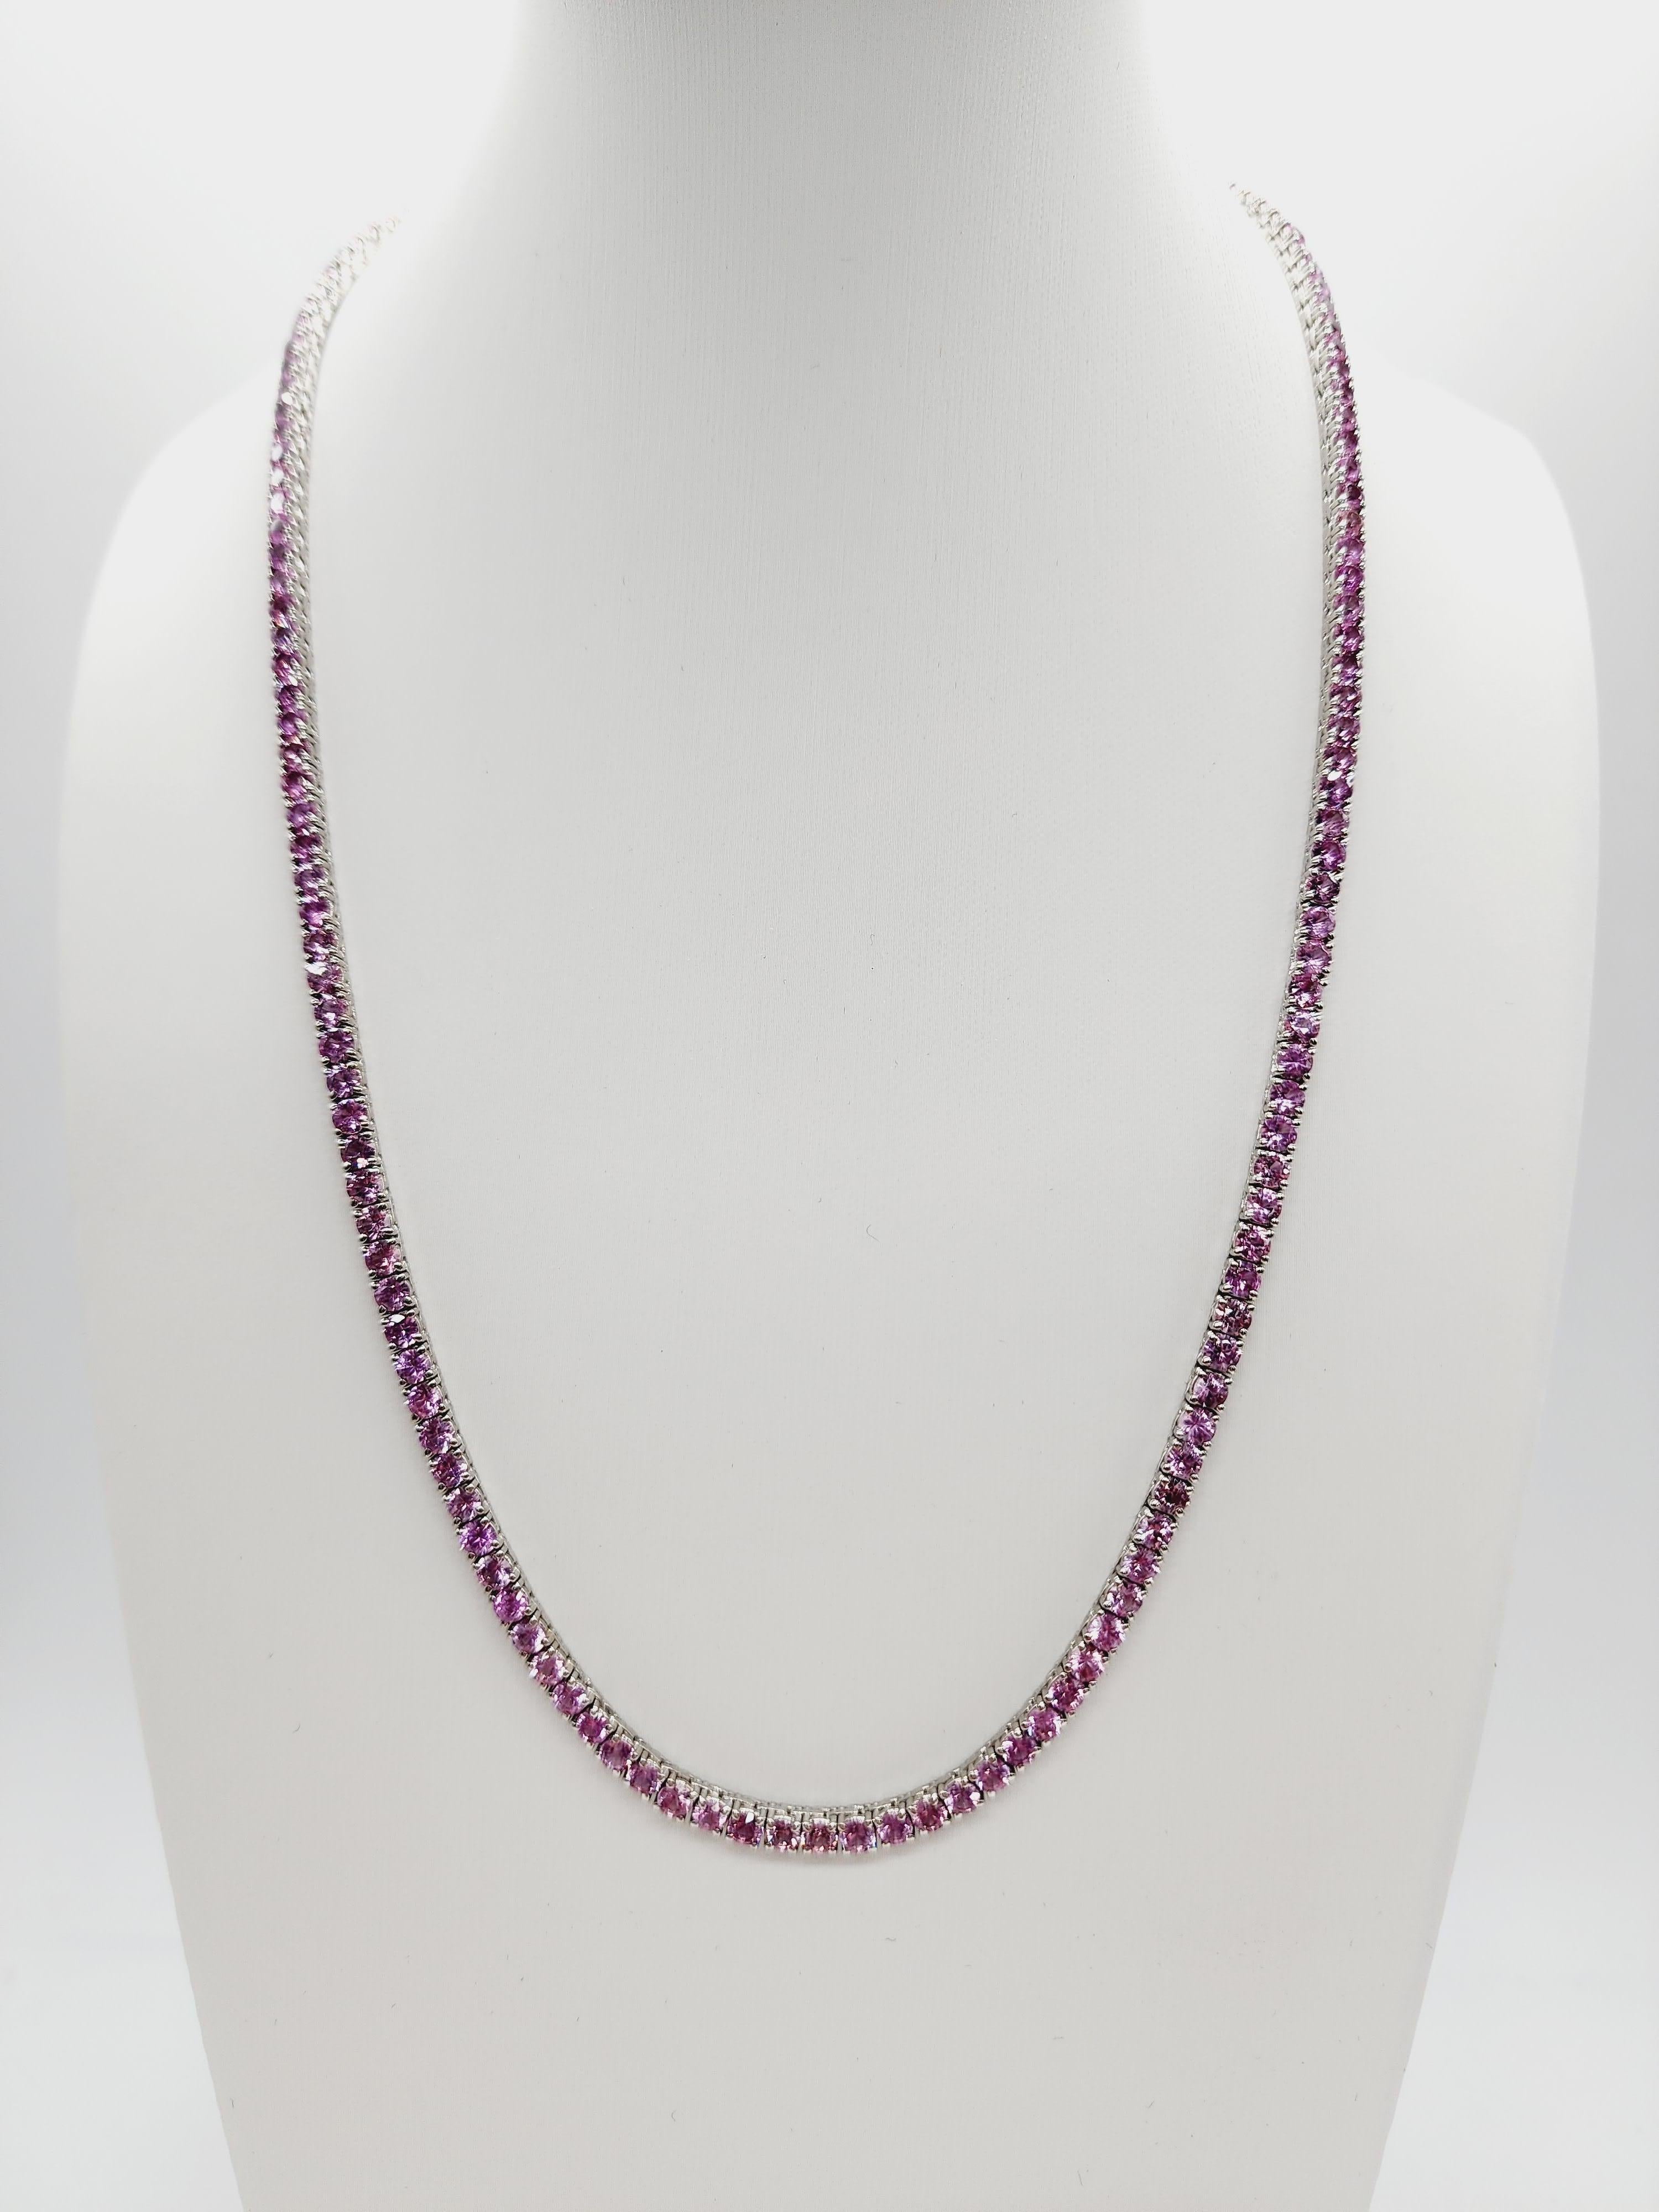 21 CARATS NATURAL PINK SAPPHIRE TENNIS NECKLACE WHITE GOLD 14K
20 INCH. 3.2MM WIDE.

All sapphire are natural, not treated.